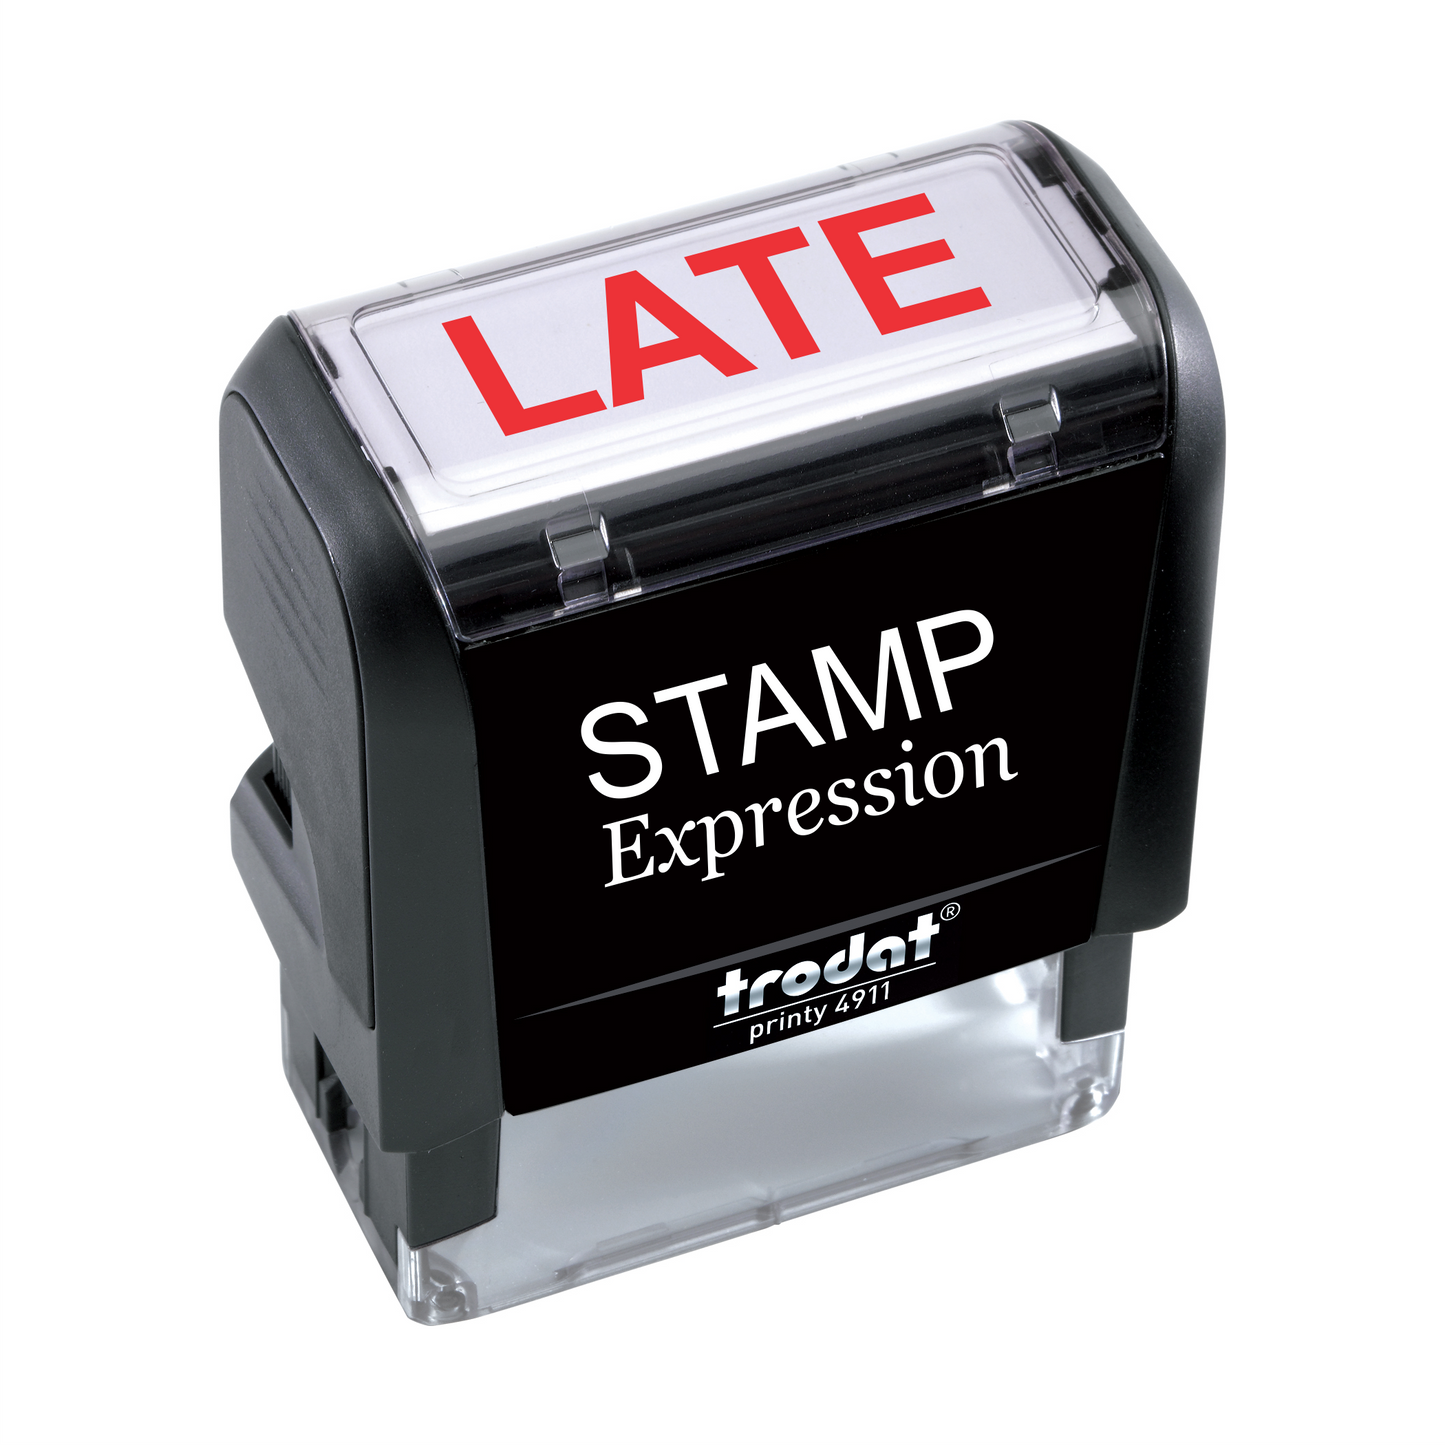 Late Office Self Inking Rubber Stamp (SH-5308)